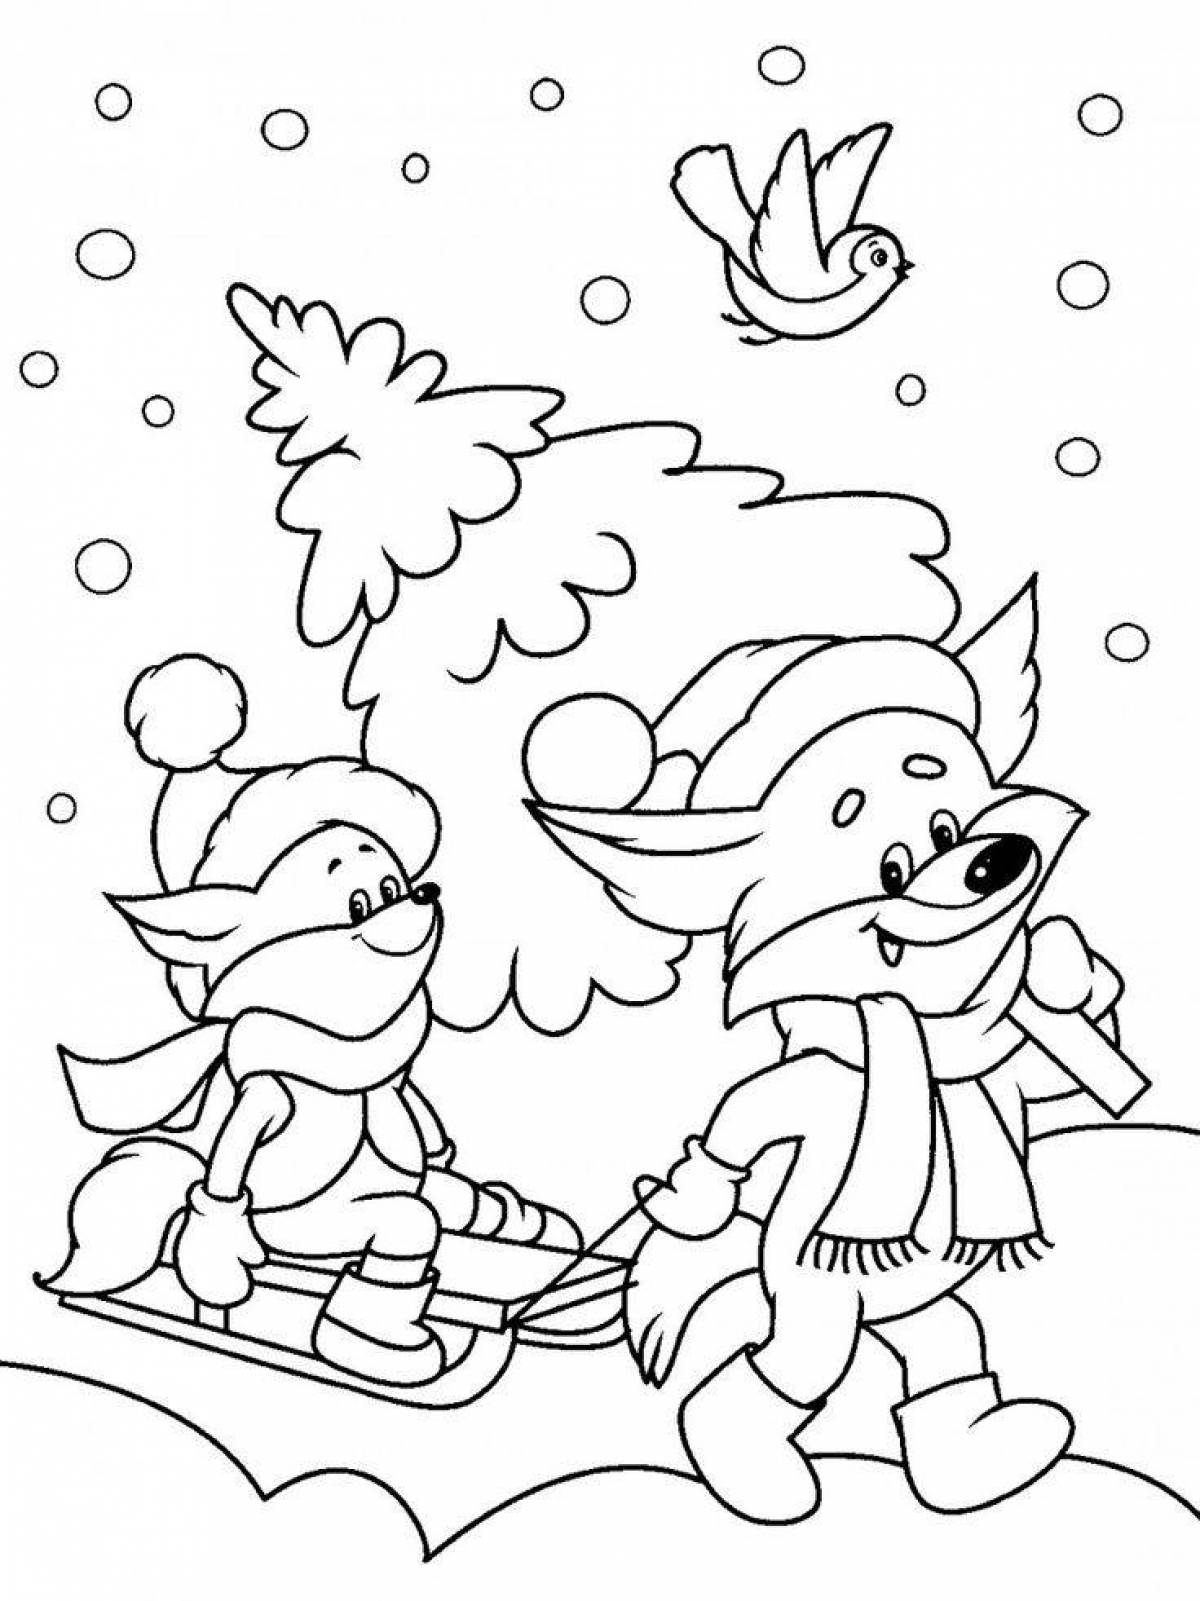 Glitter winter coloring book for children 4-5 years old